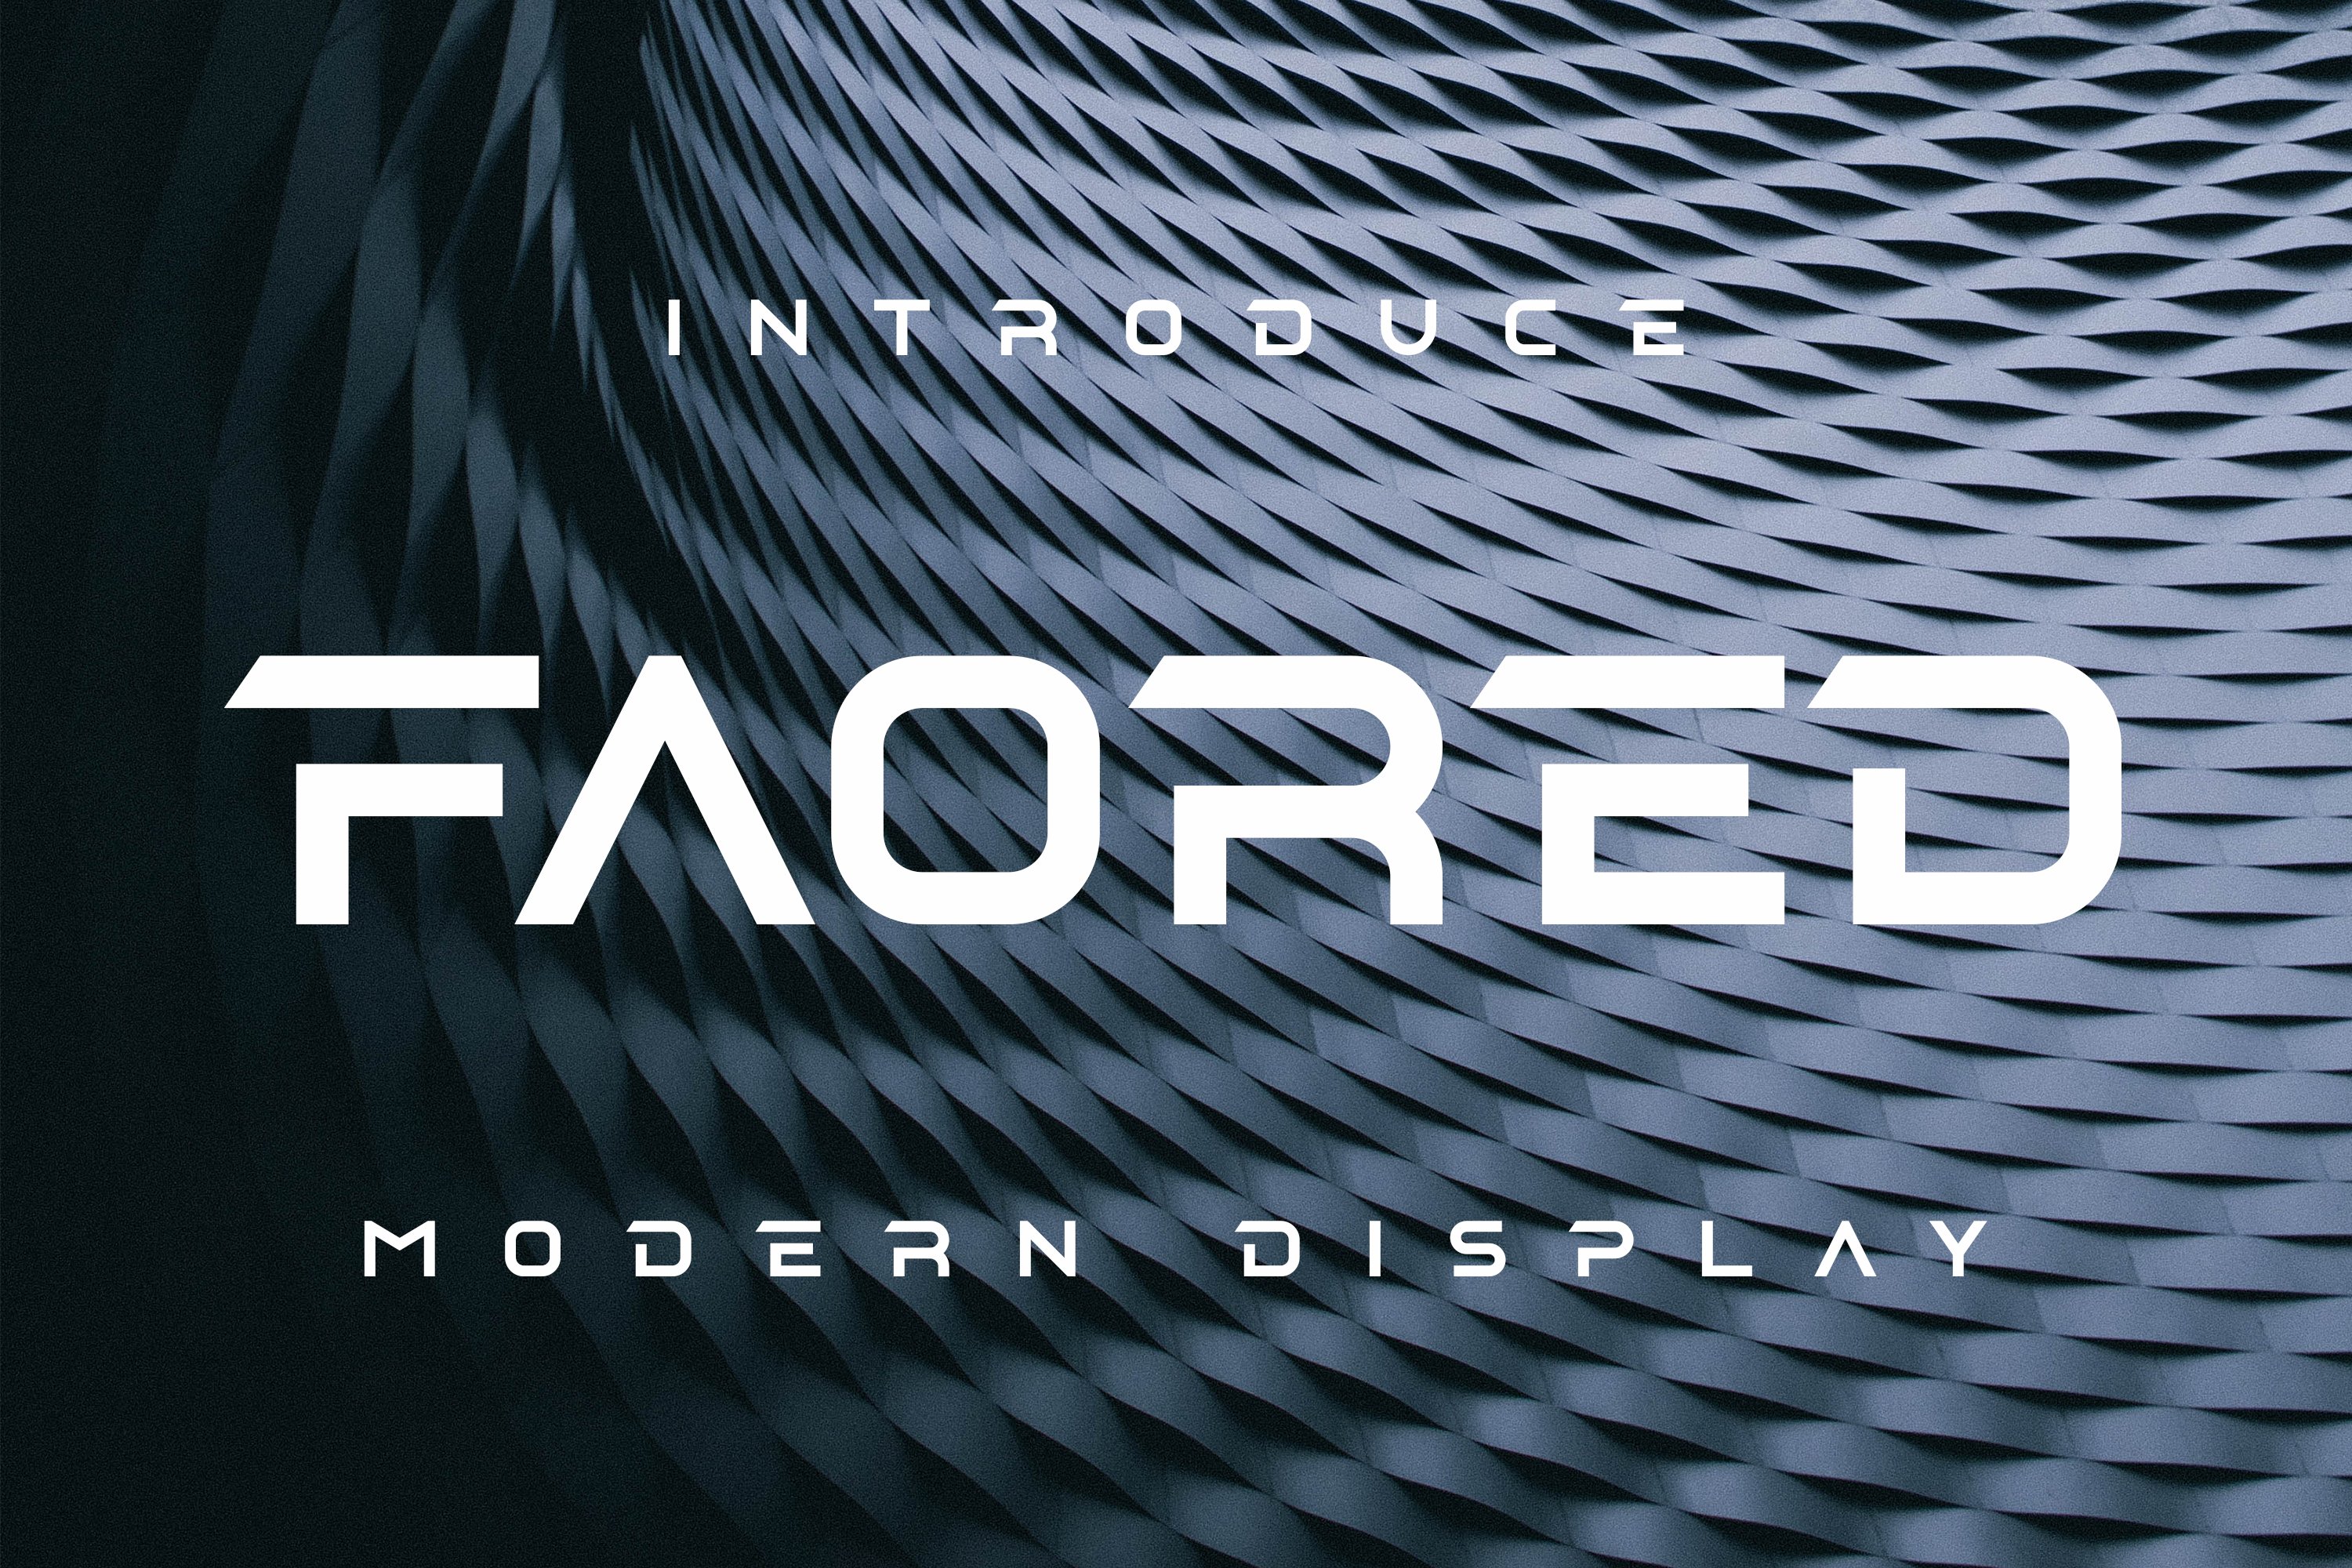 Faoredcover image.